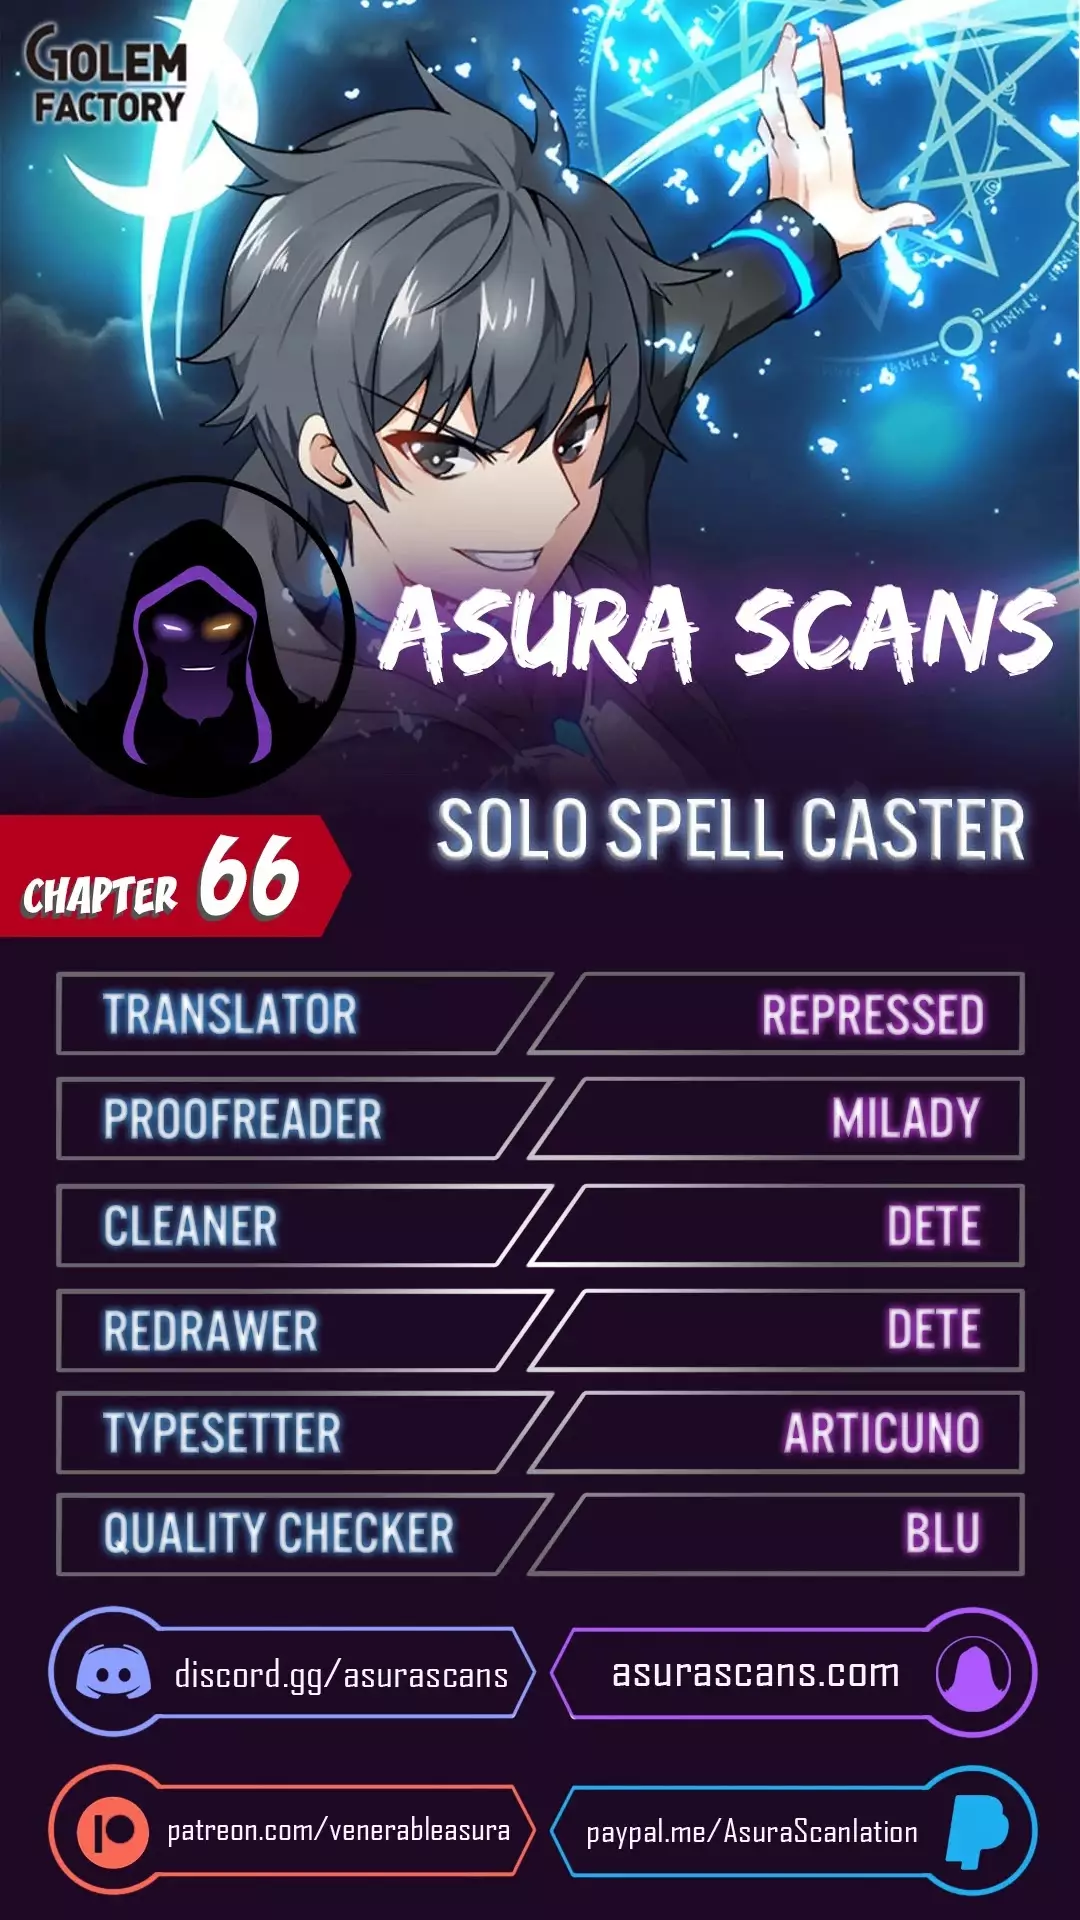 Solo Spell Caster - 66 page 1